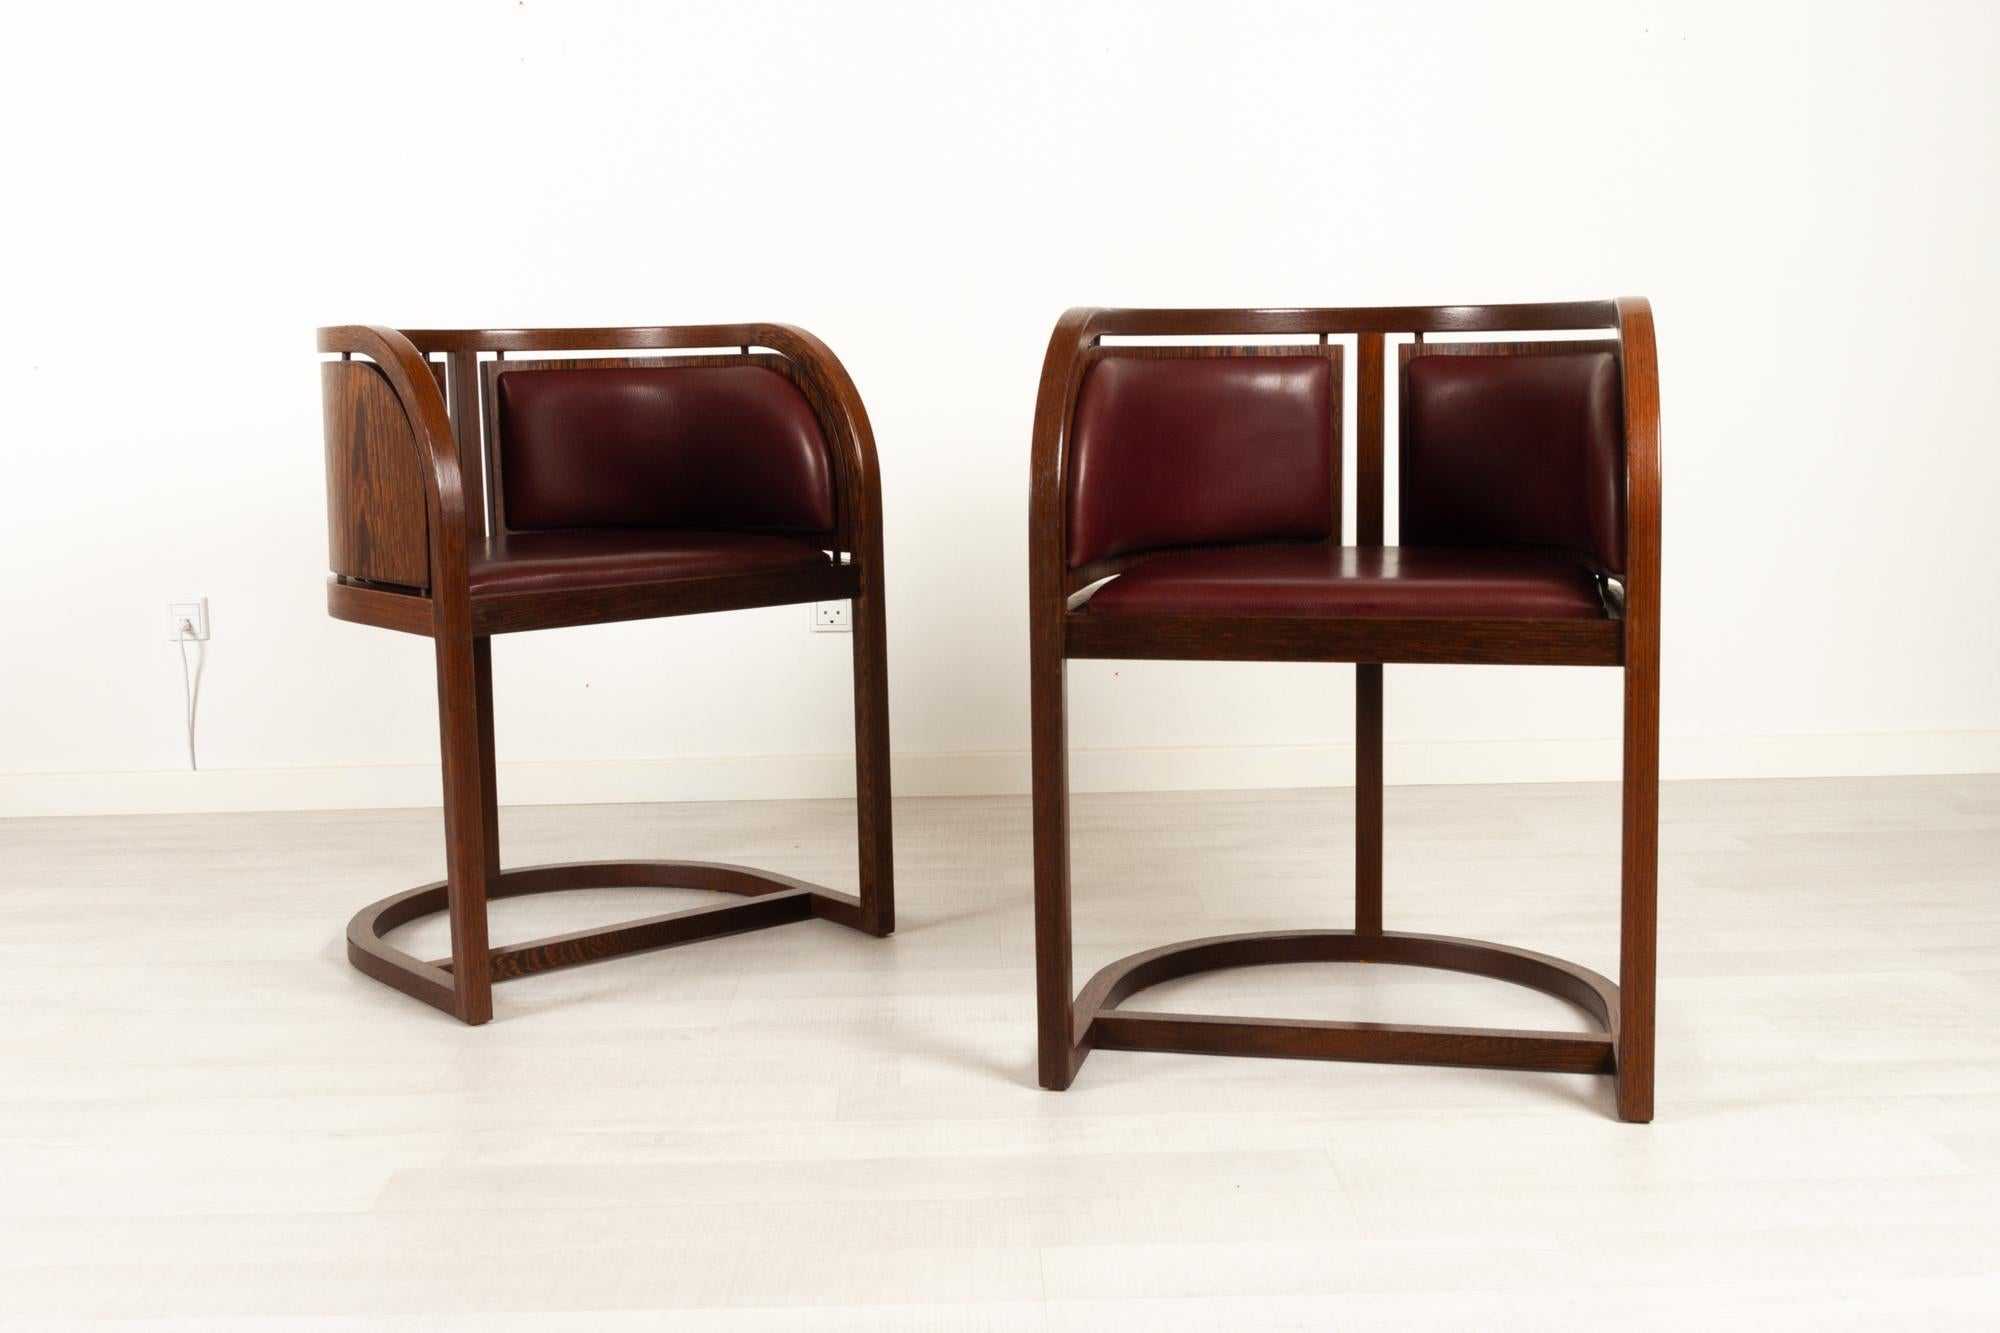 Pair of Danish Wengé armchairs by Thorup & Bonderup, 1970s
Set of two very rare armchairs designed by Torsten Thorup and Claus Bonderup exclusively for display at the Georg Jensen showroom in Copenhagen. Georg Jensen is a world renowned Danish